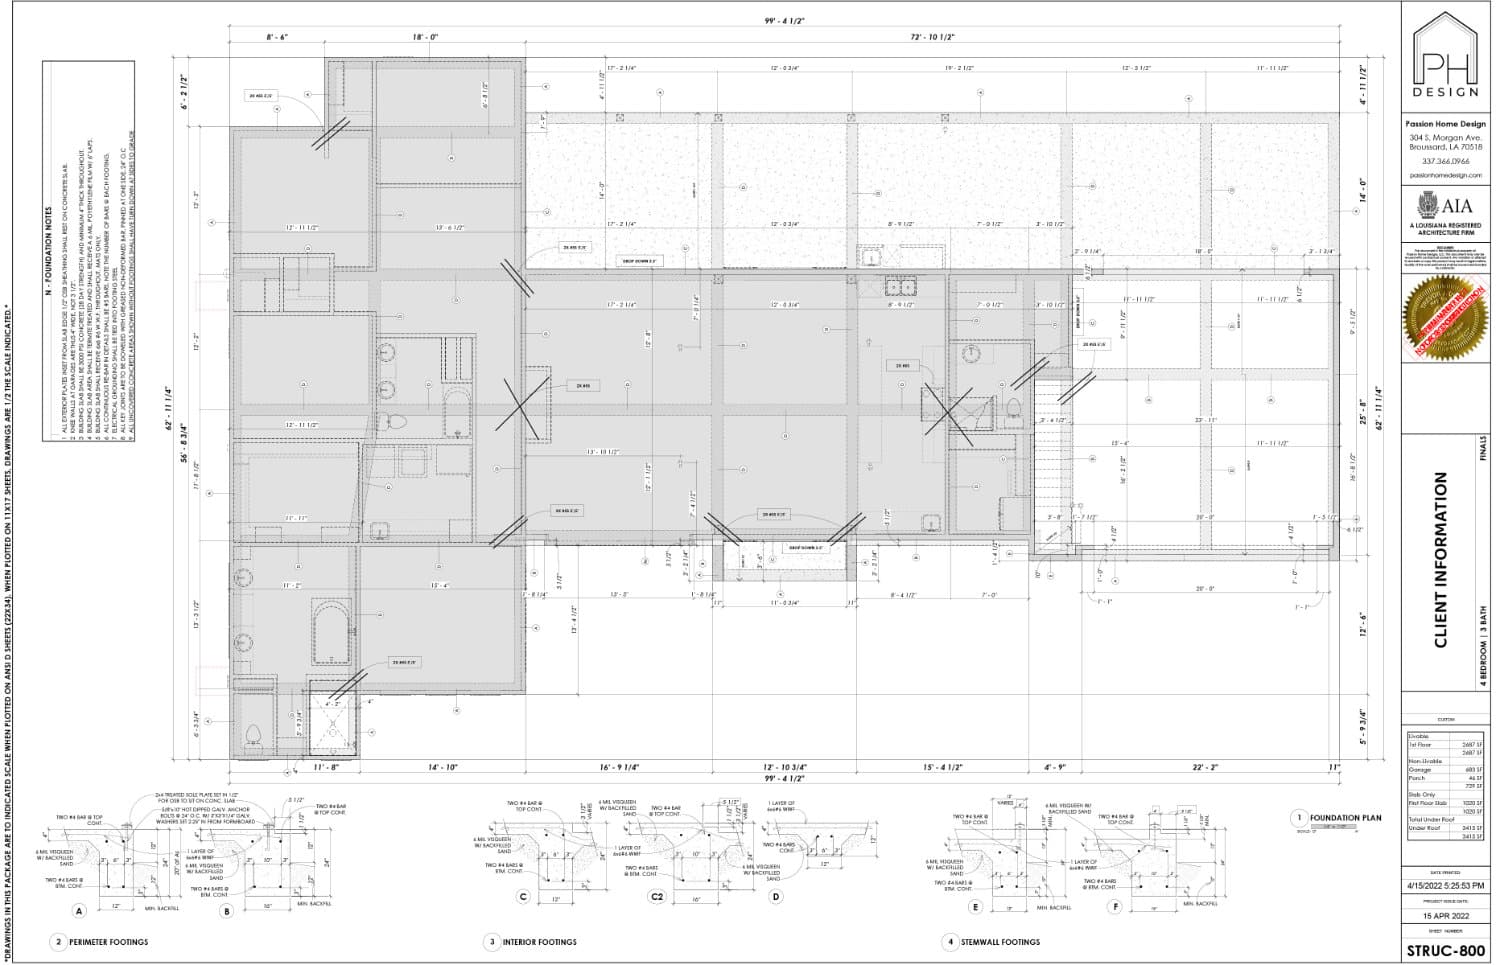 Foundation plan page of blueprint plans